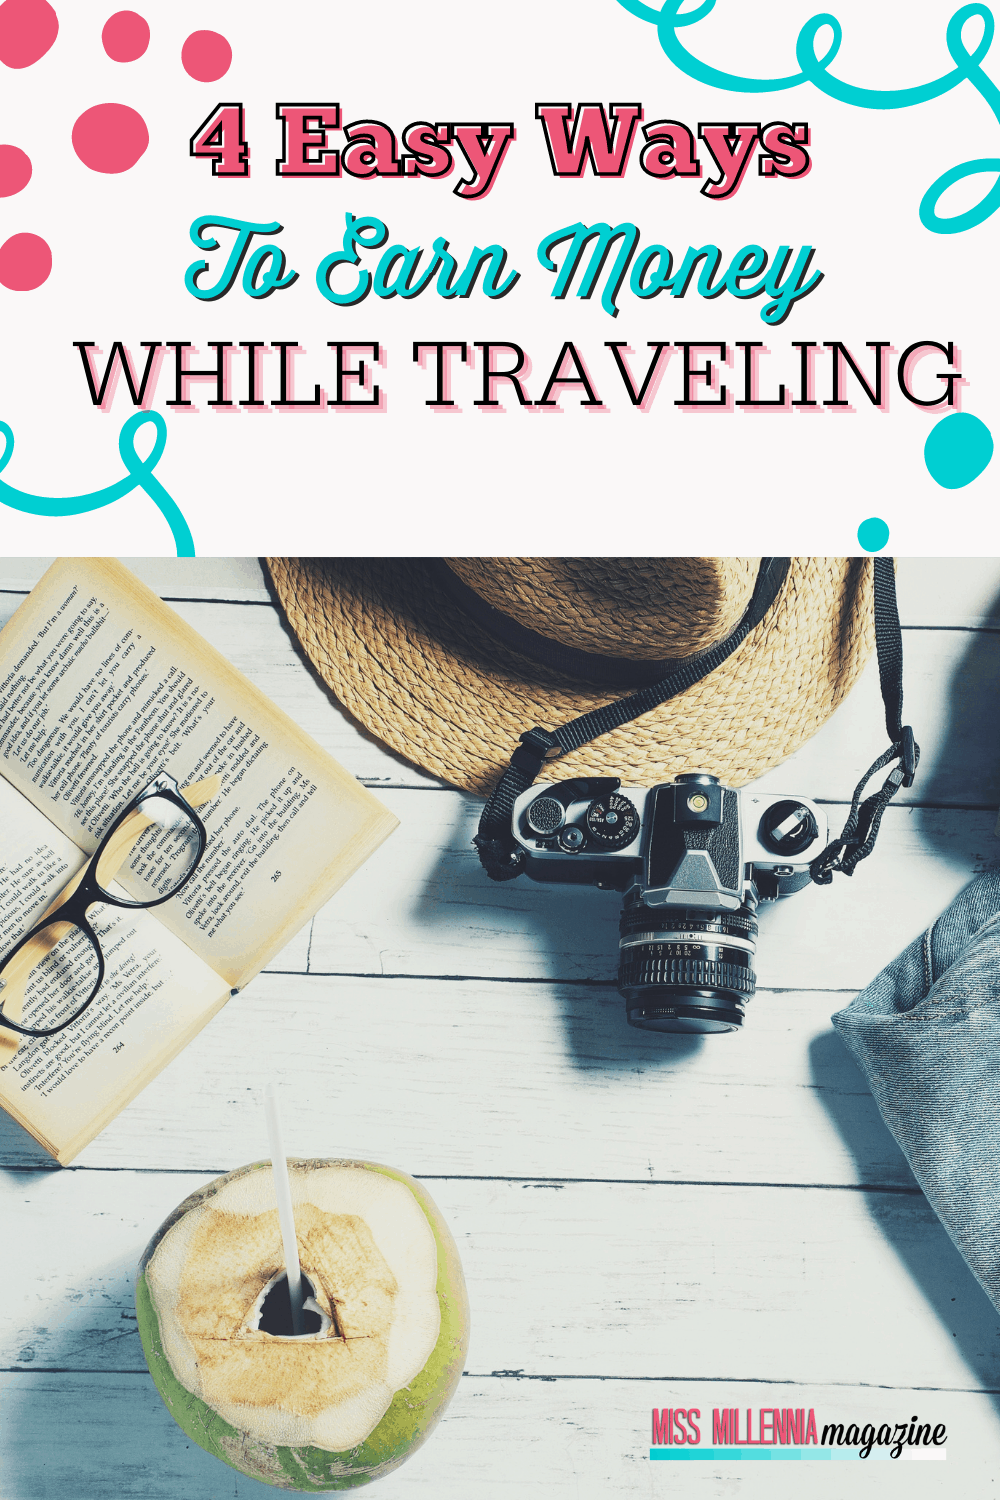 4 Easy Ways to Earn Money While Traveling